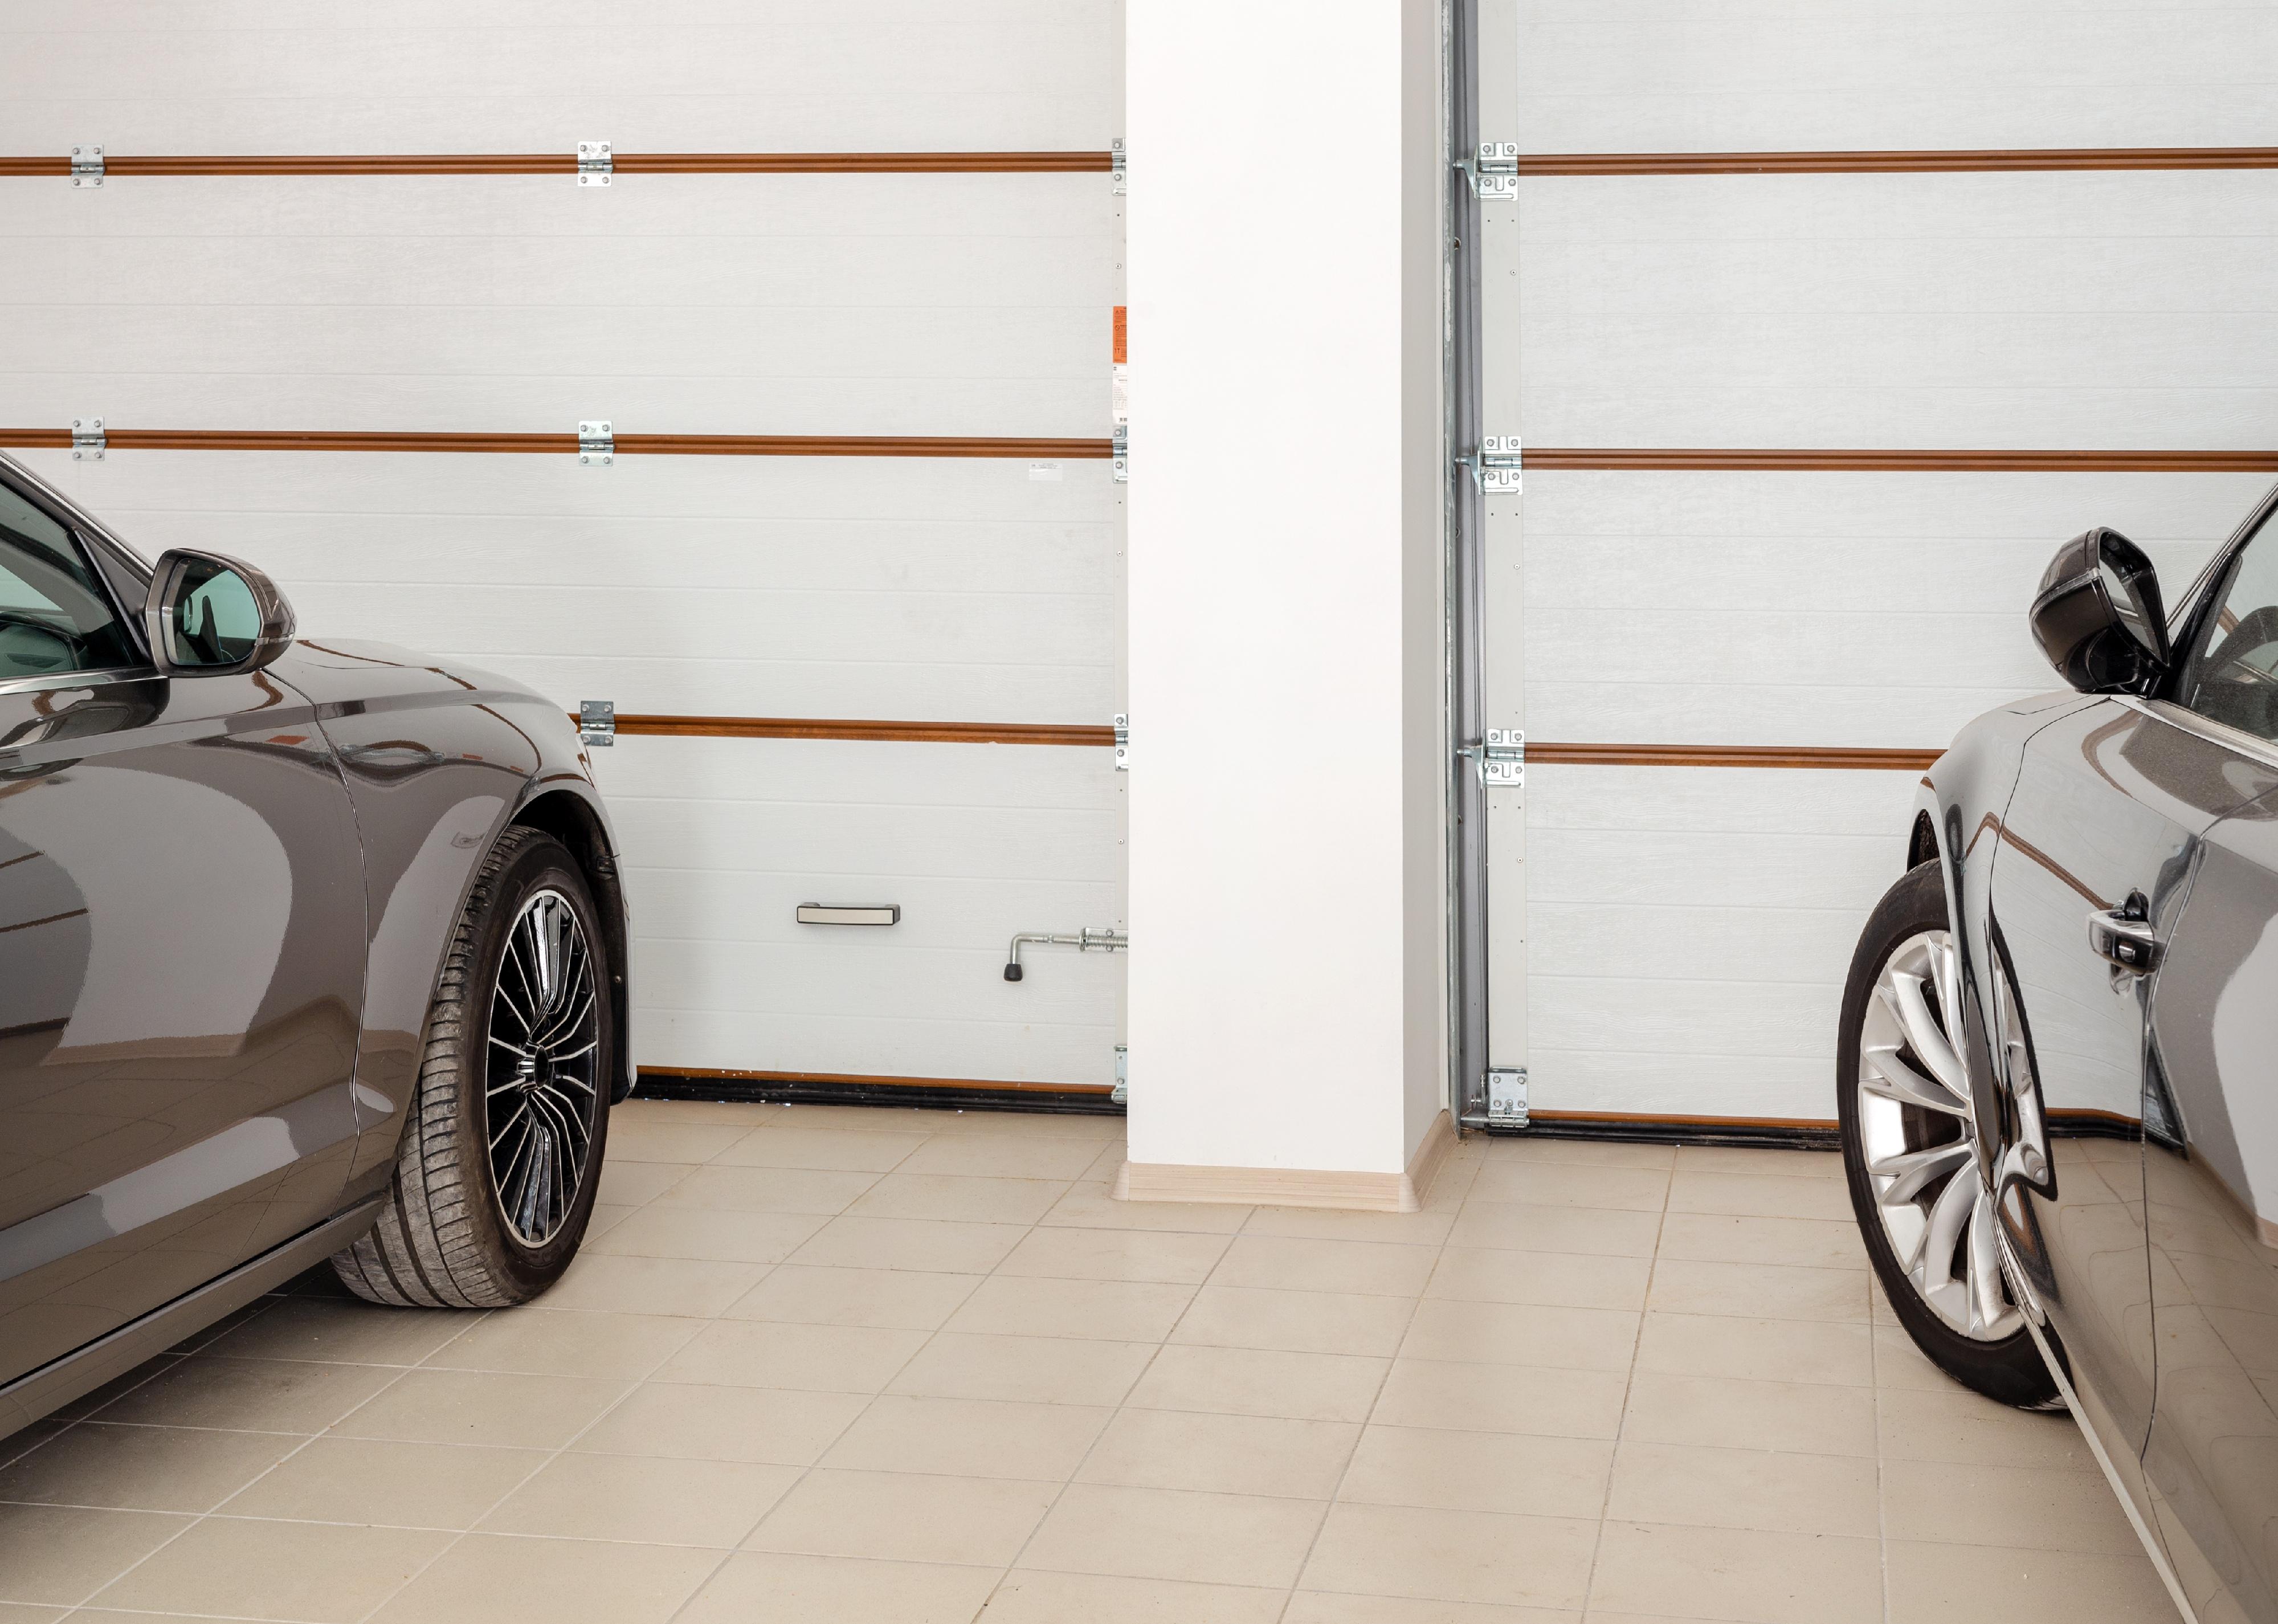 Home garage with two vehicles, interior.